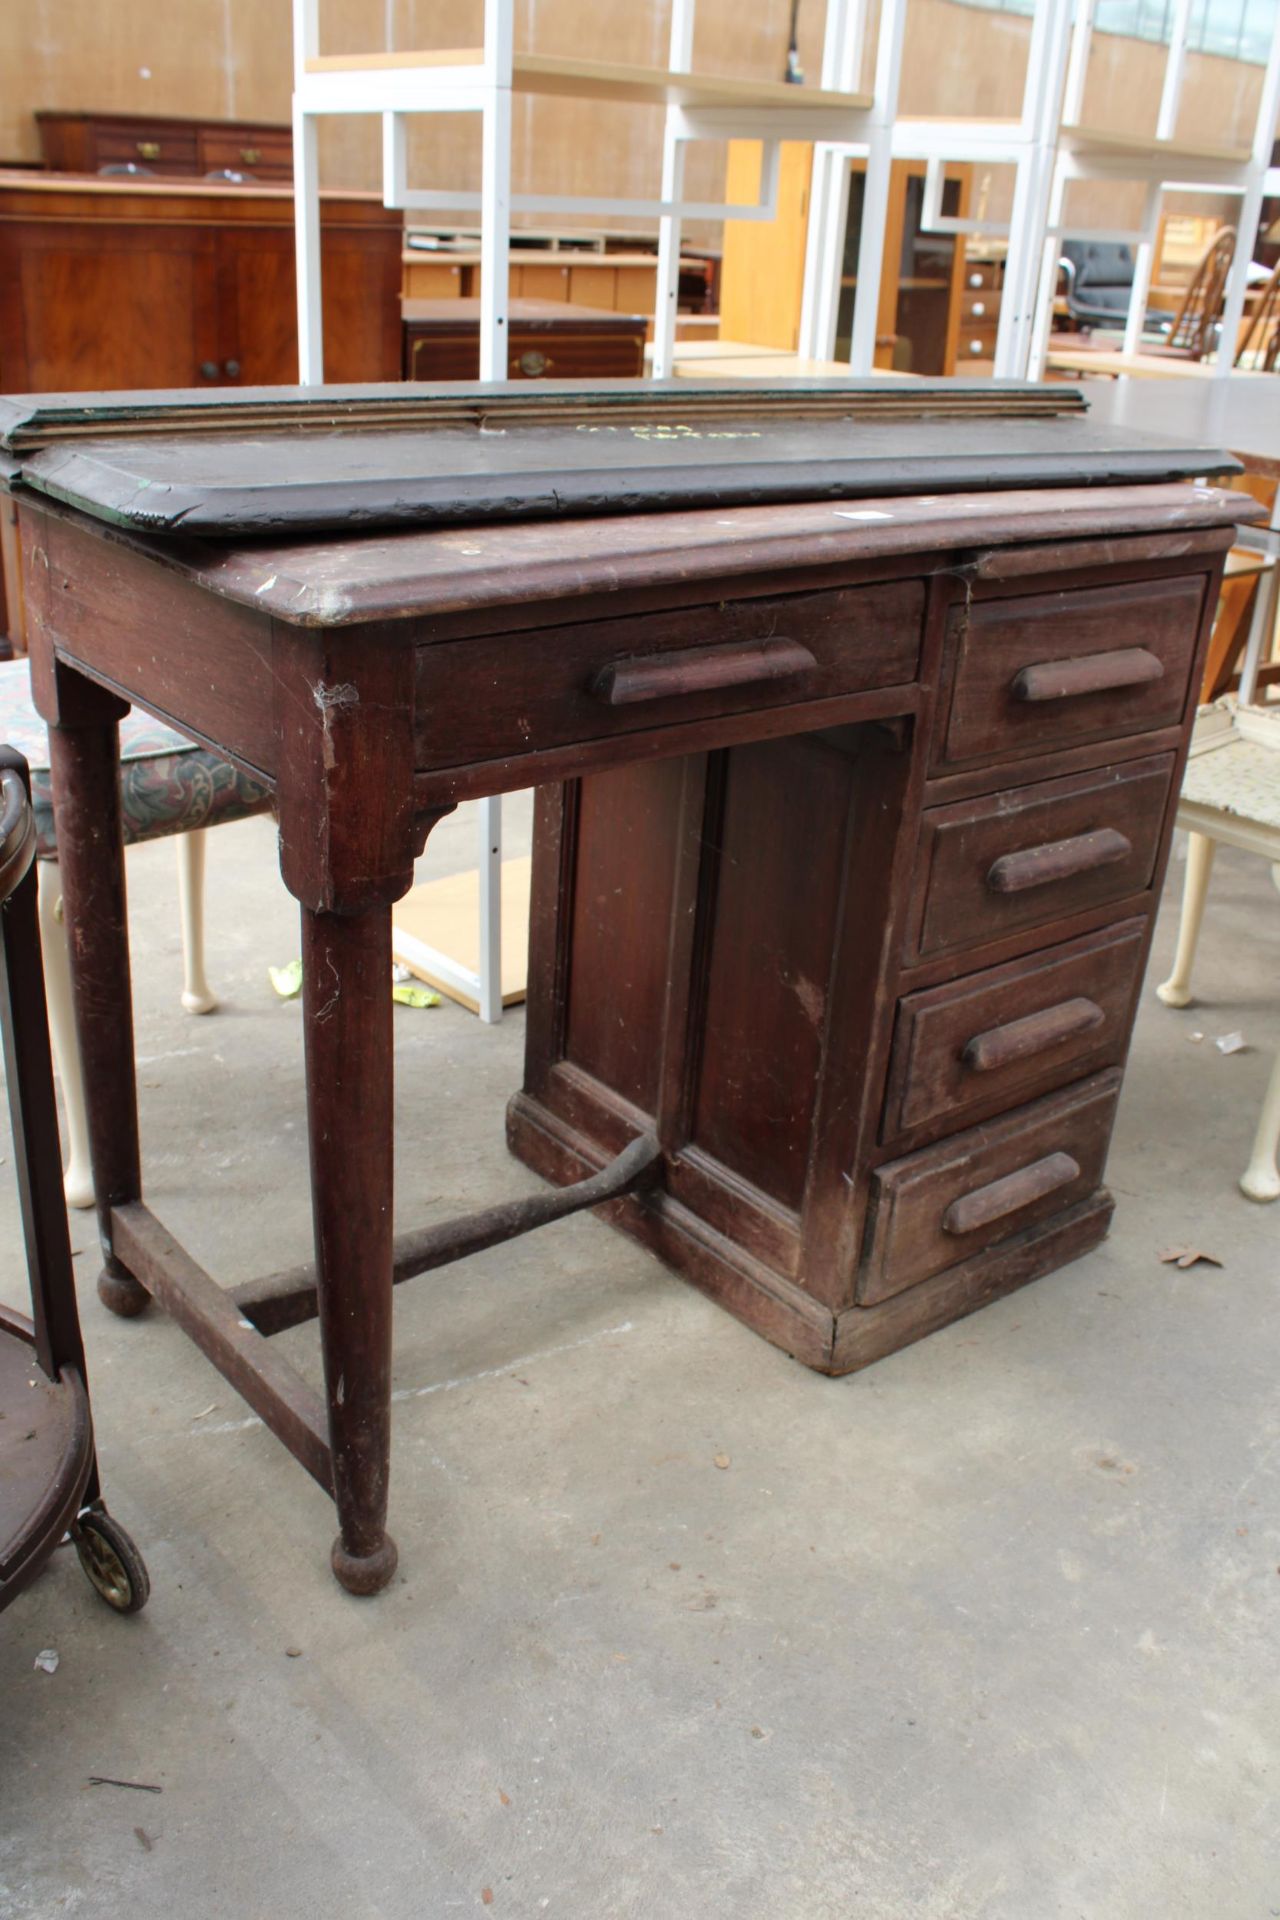 AN EARLY 20TH CENTURY OAK SINGLE PEDESTAL DESK ENCLOSING FIVE DRAWERS AND A SLIDE 36" X 21" - Image 2 of 2